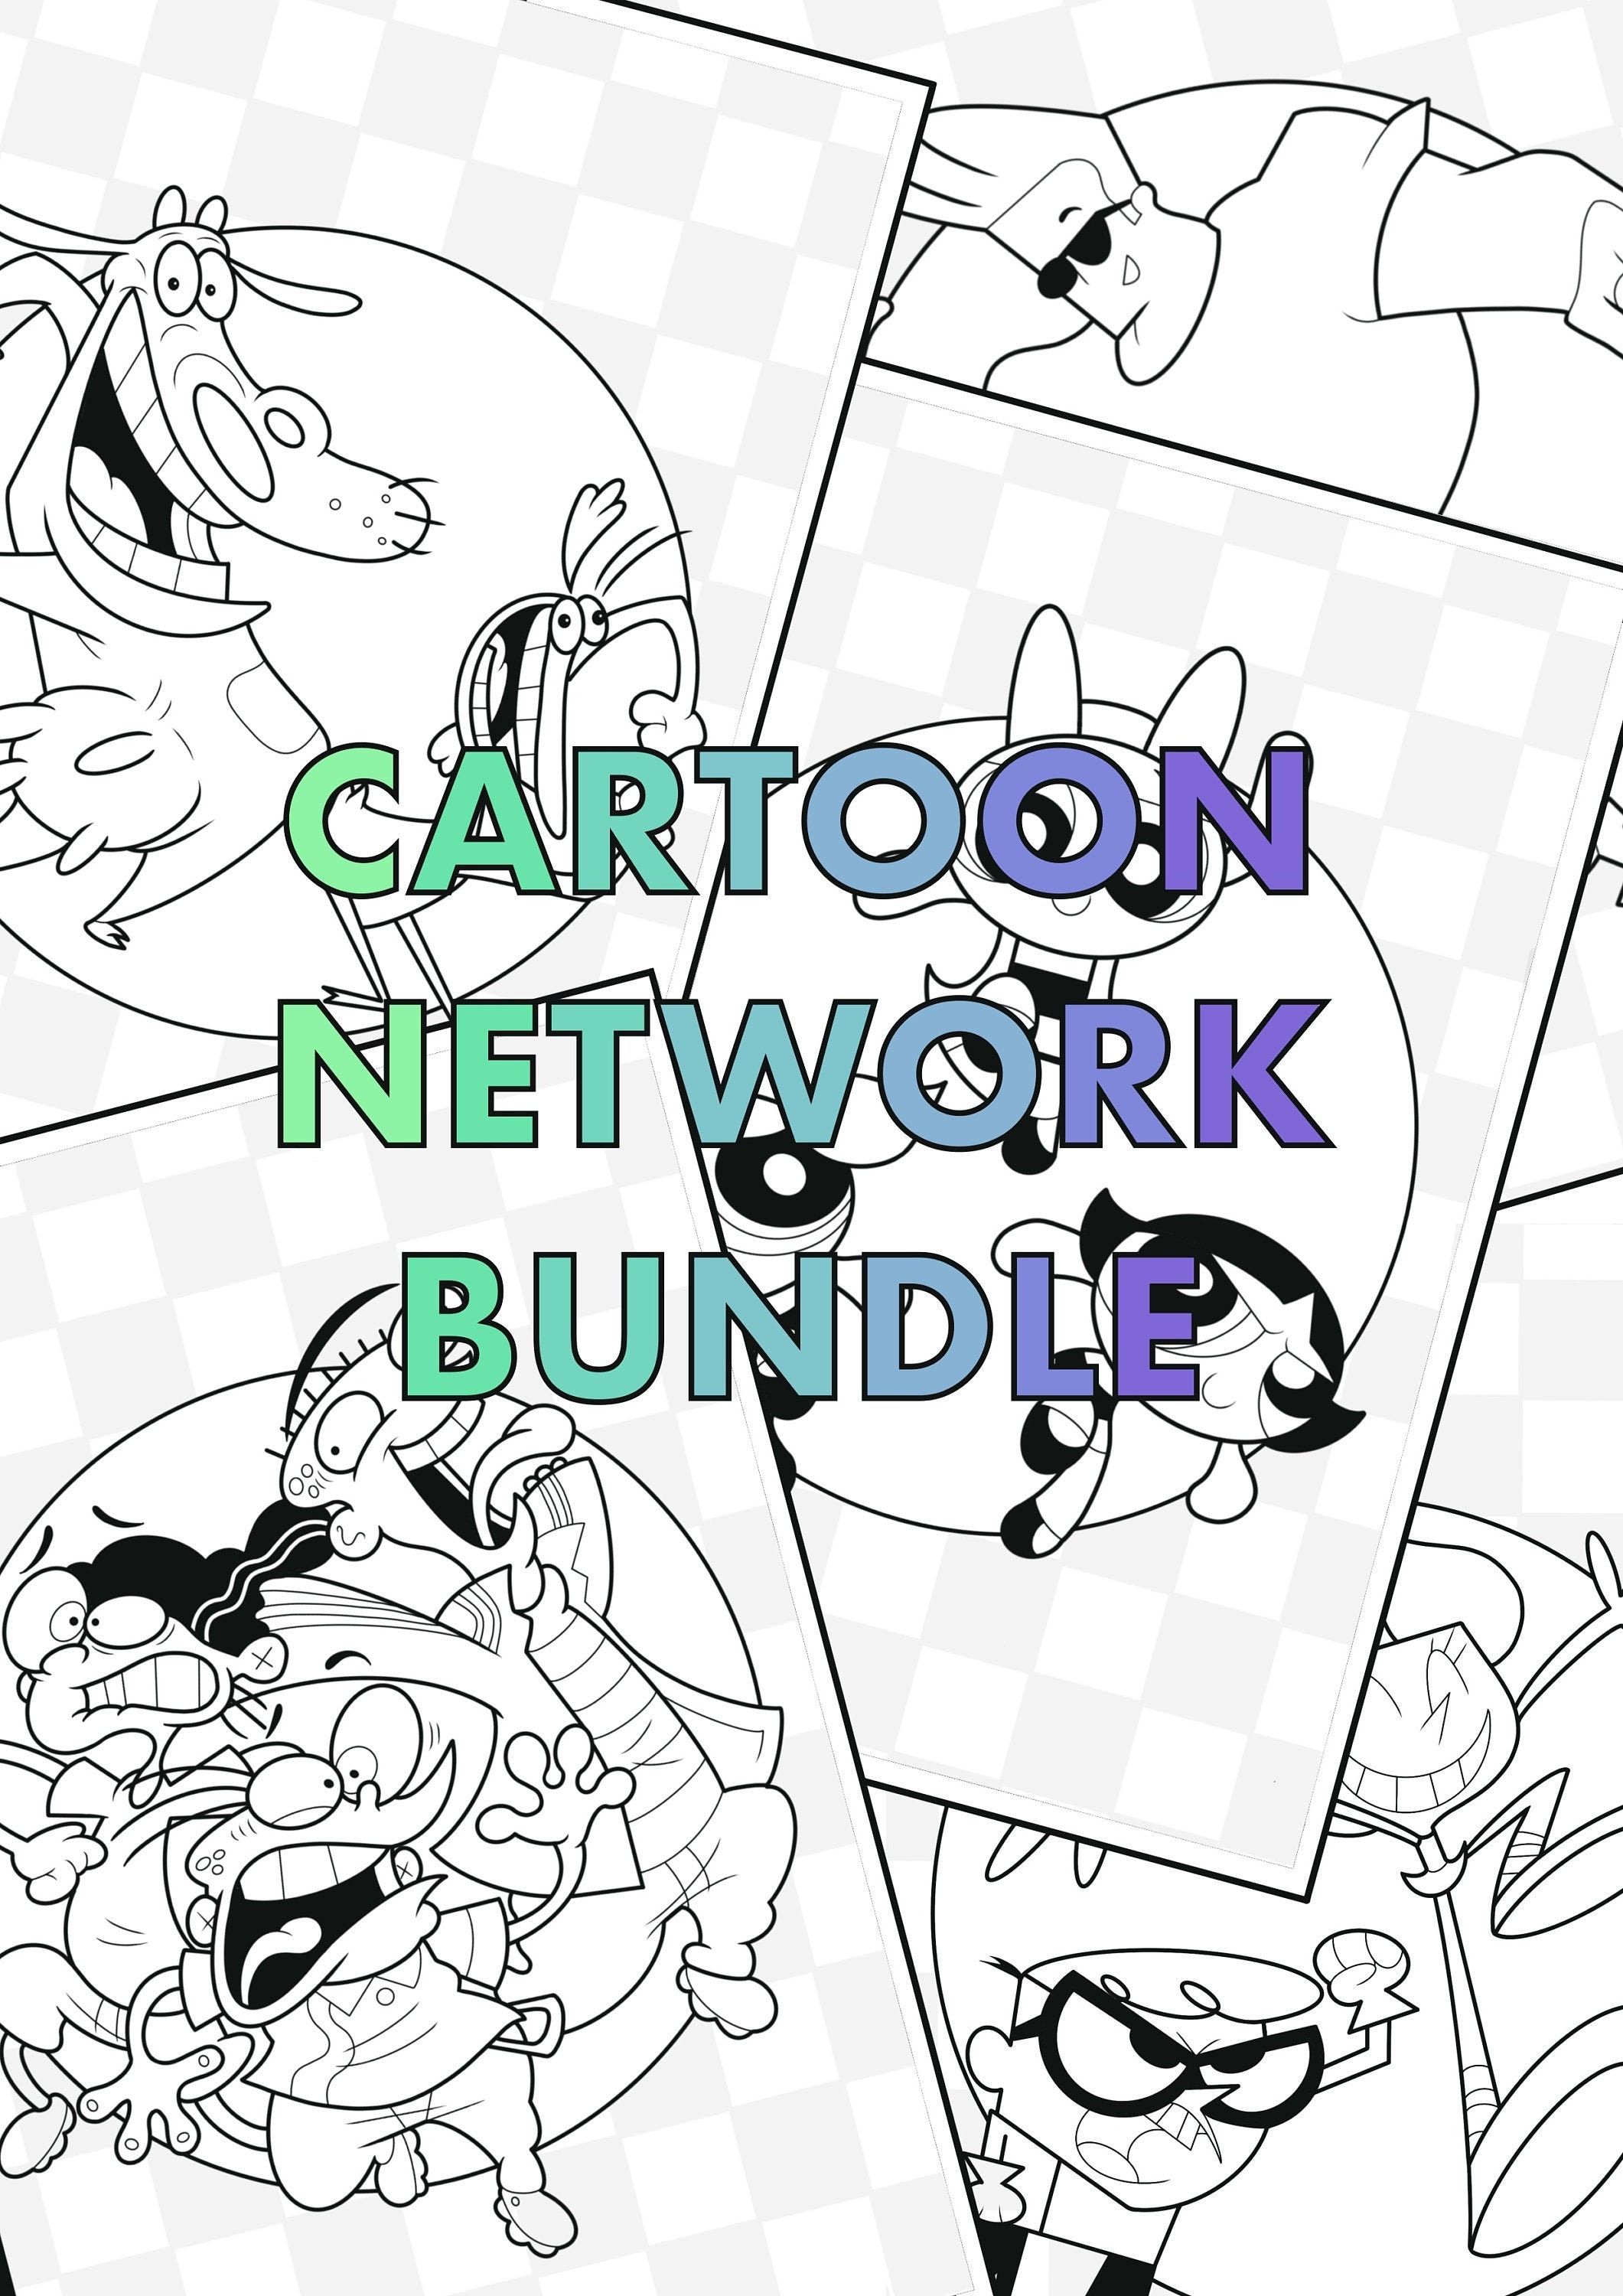 Cartoon Network classic Bundle X5 Colouring Pages - Etsy Ireland